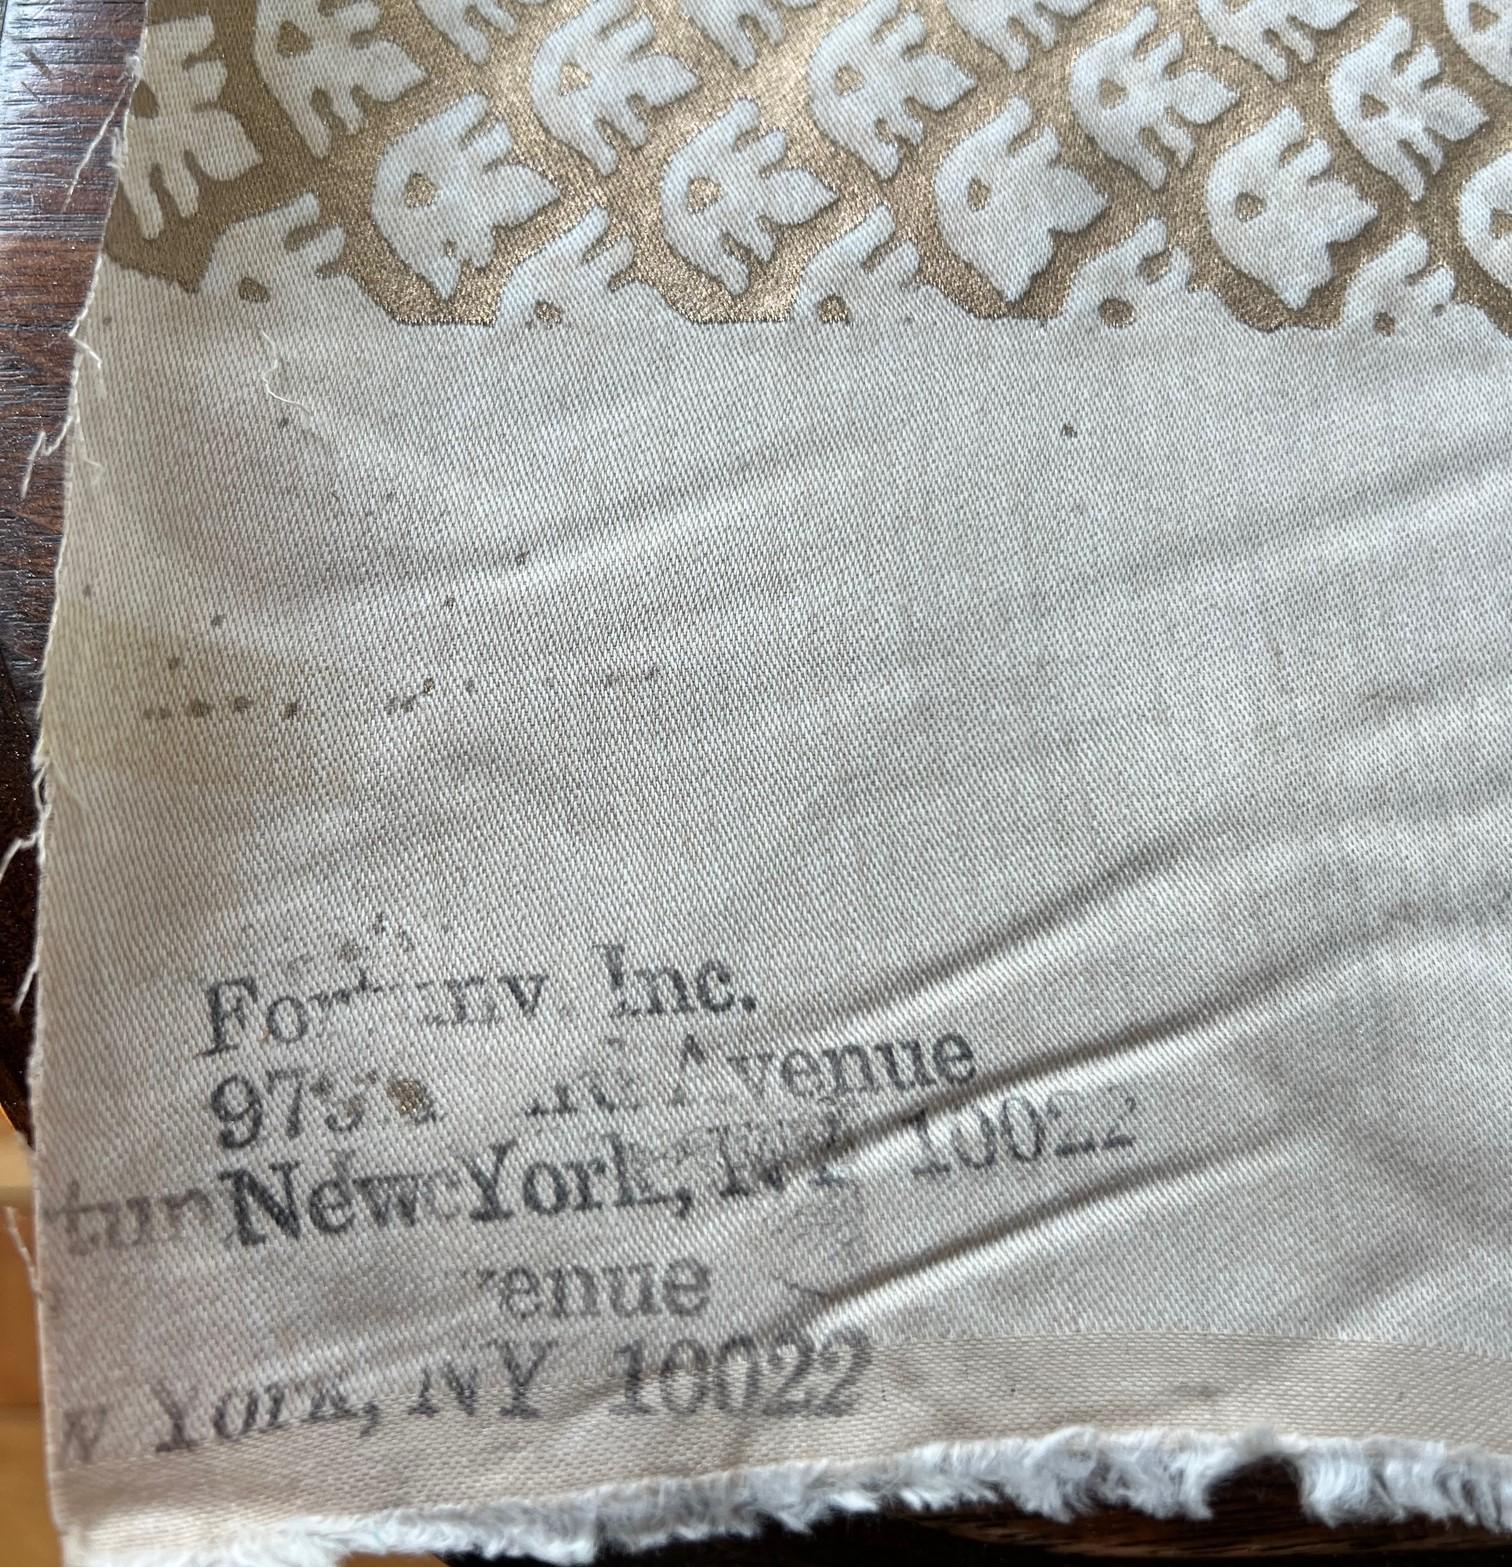 Venetian Fortuny Canestrelli Fabric in Ivory and Silvery Gold, 5.25 Yards For Sale 1